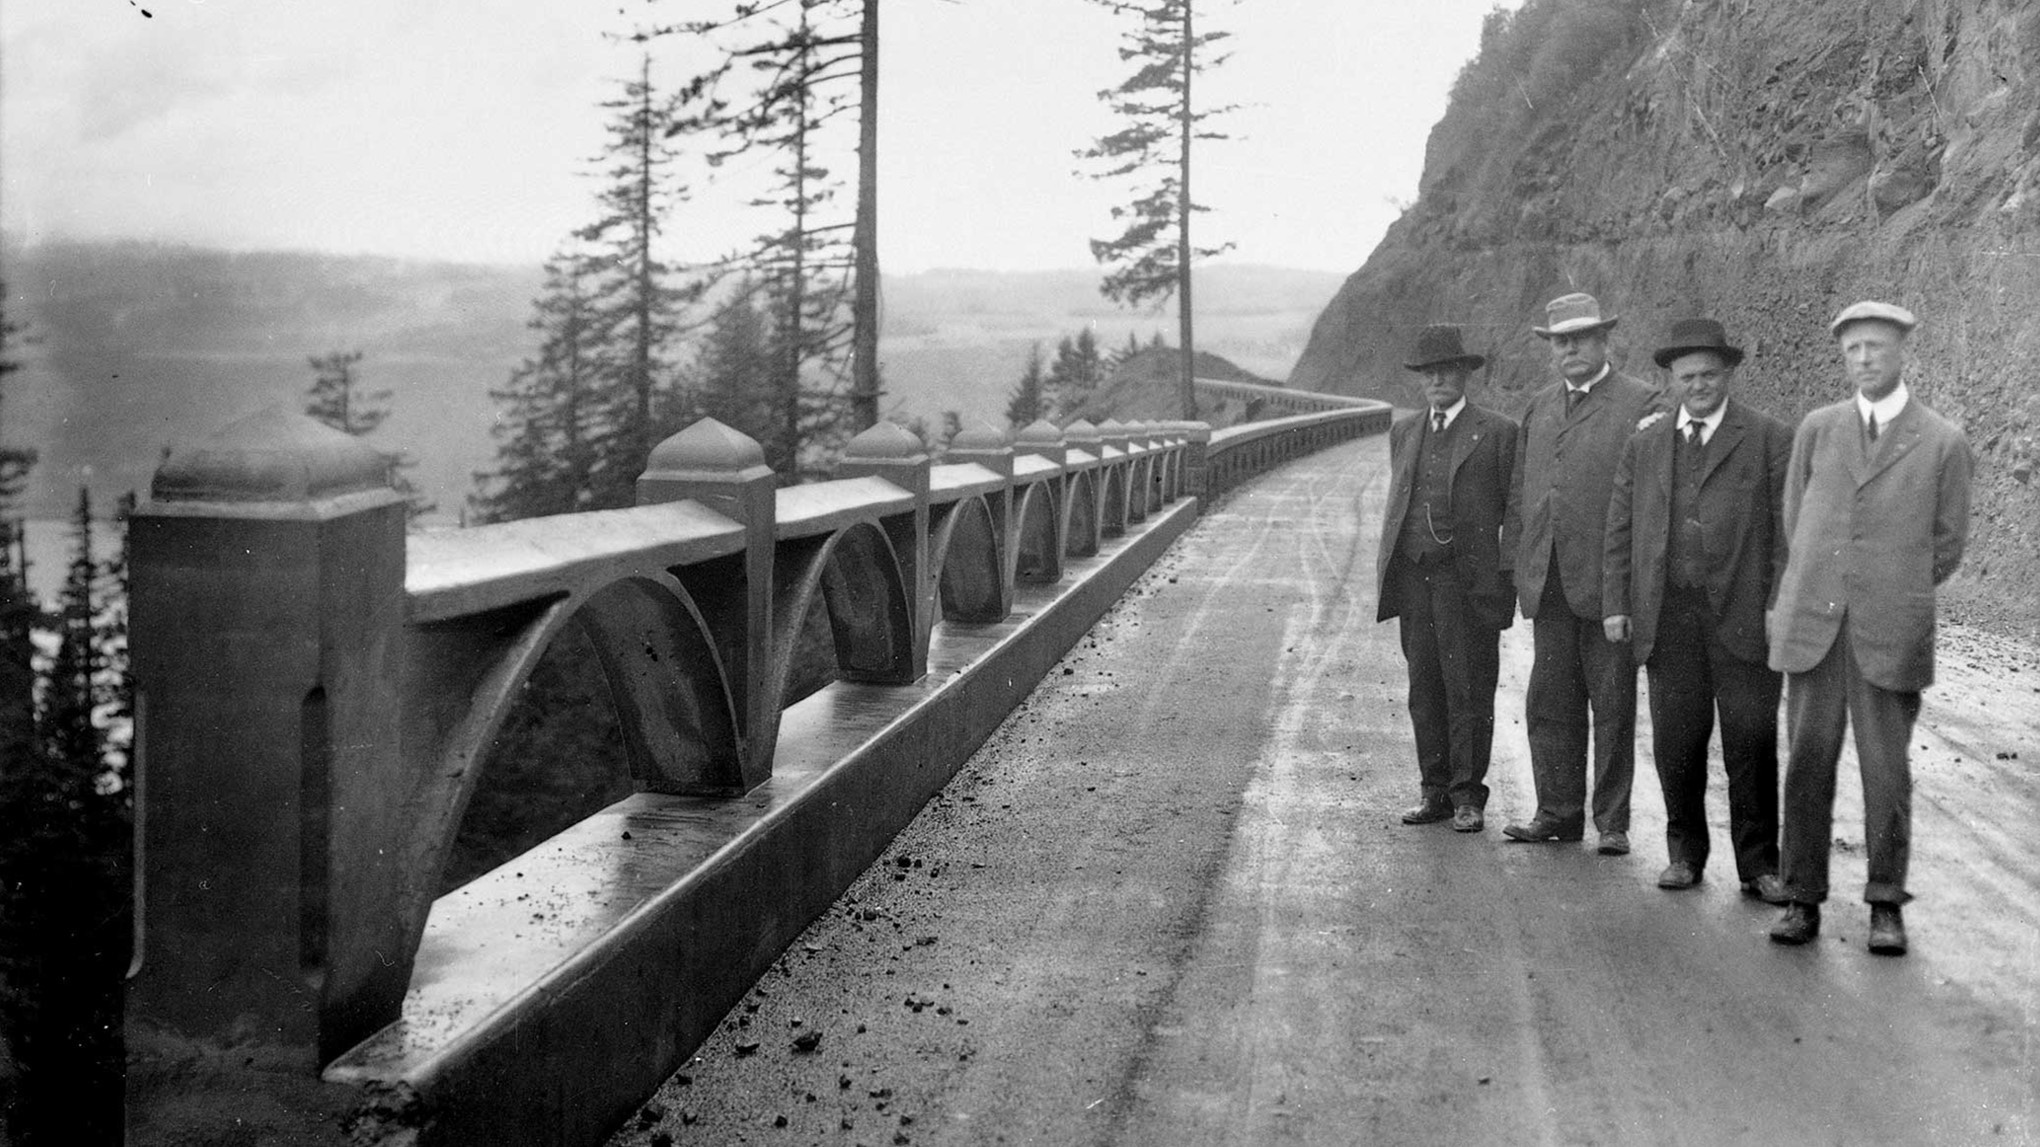 Sam Hill and company on newly developed Interstate 5